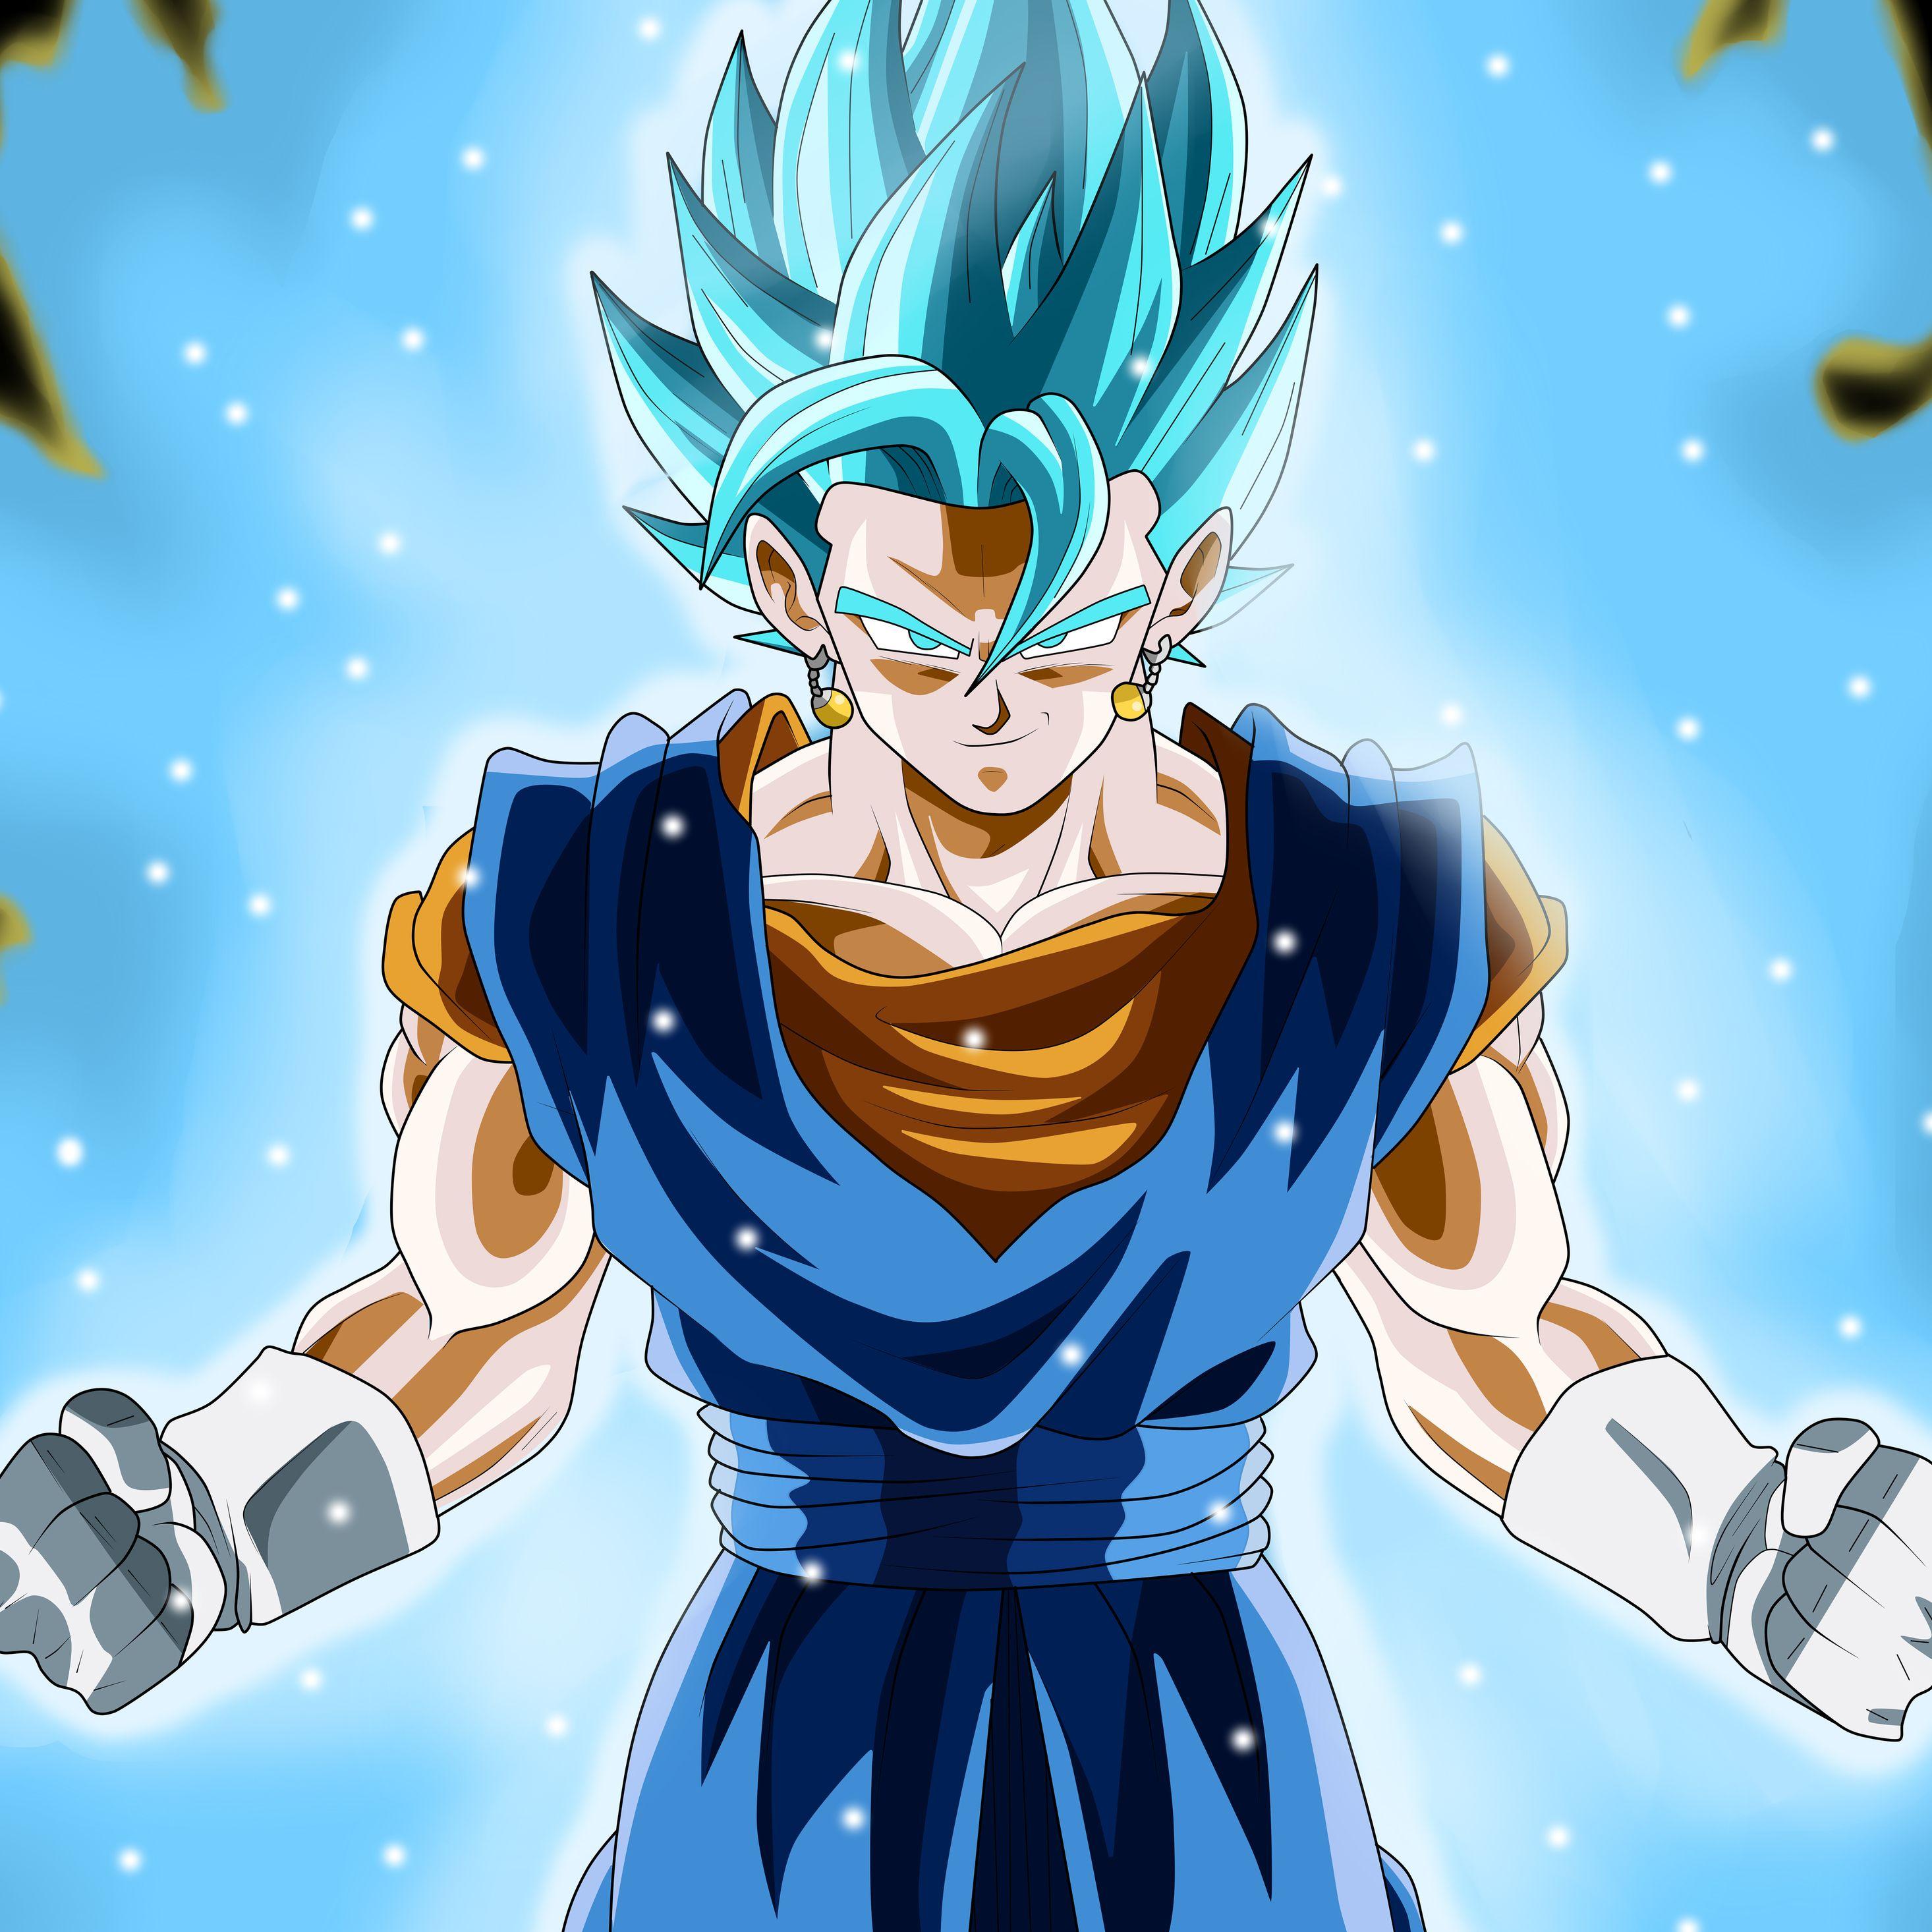 810+ Anime Dragon Ball Z HD Wallpapers and Backgrounds